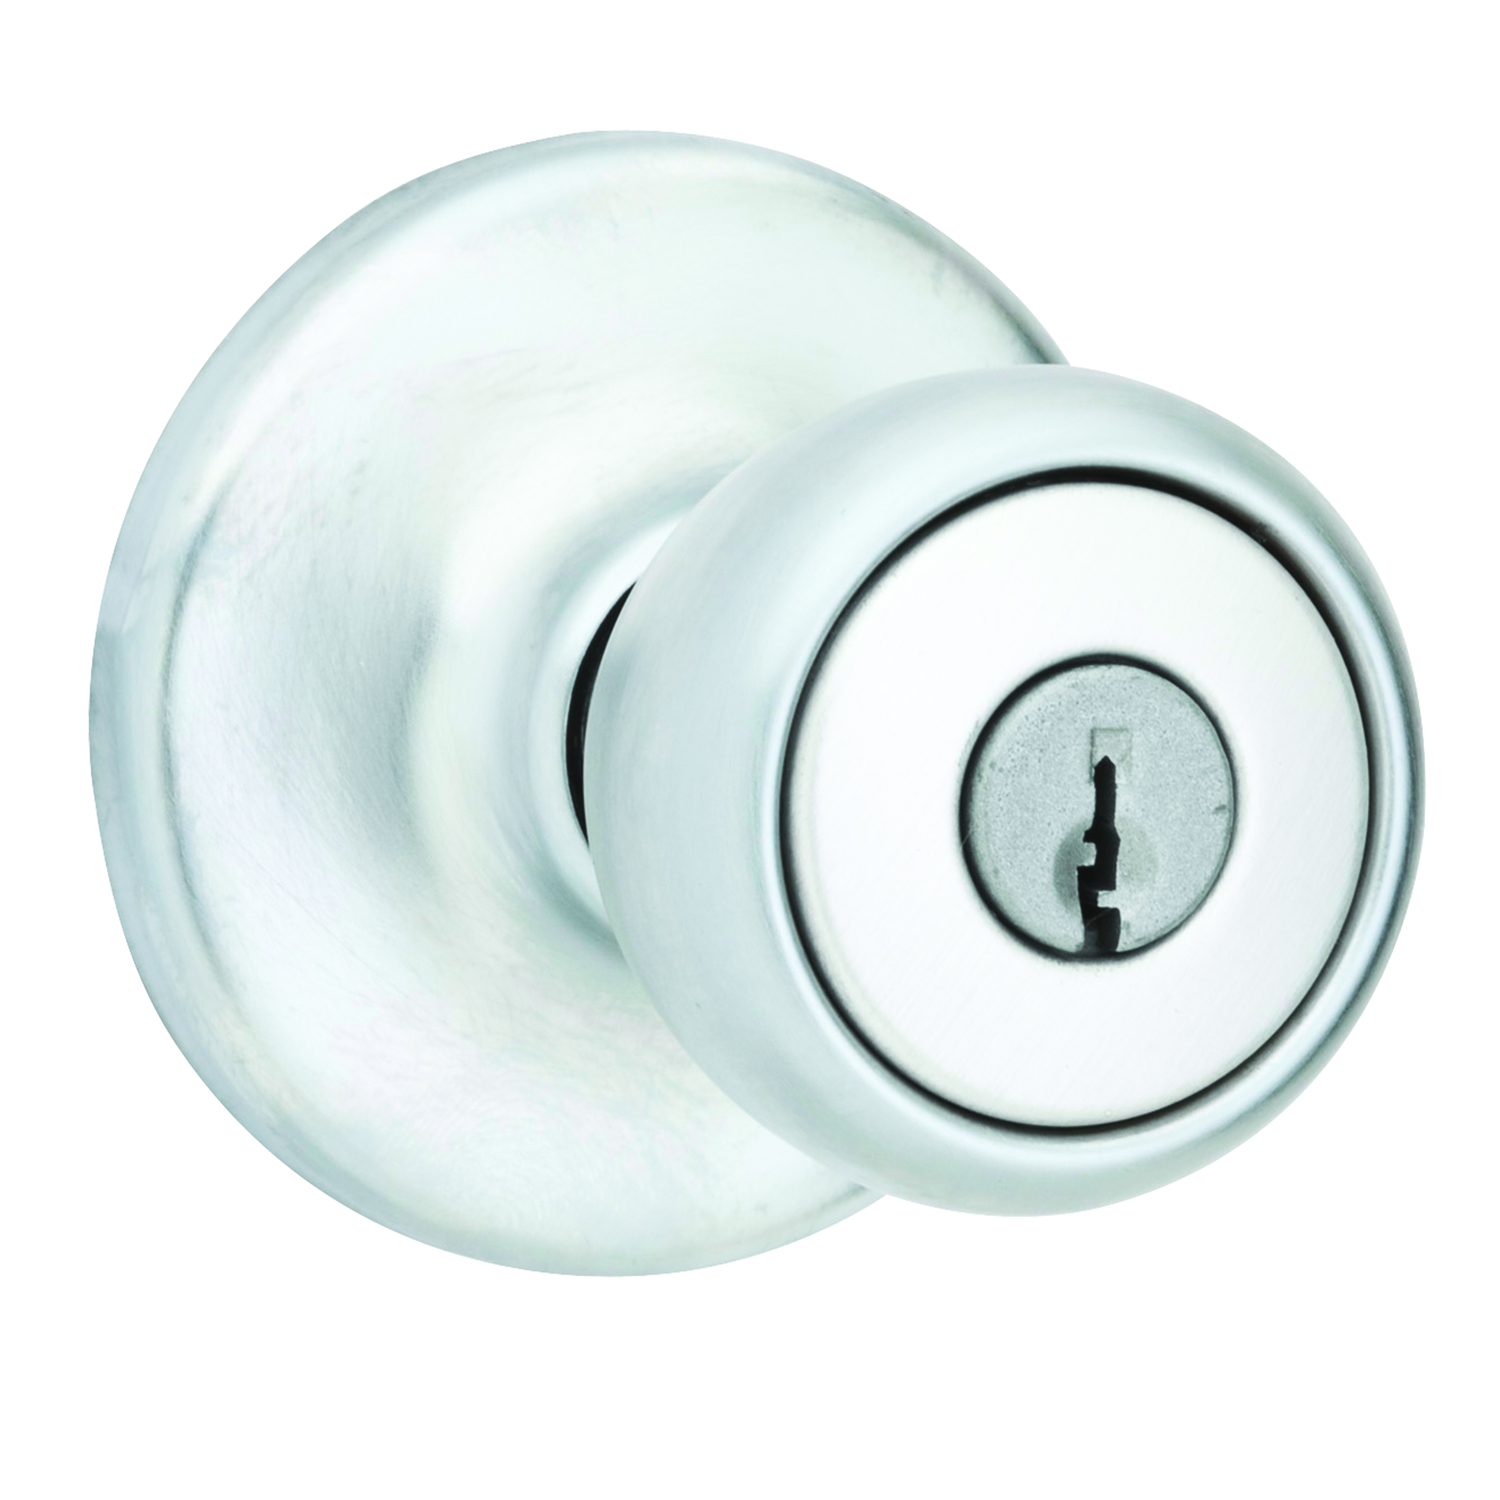 UPC 042049162301 product image for Kwikset Tylo Satin Chrome Steel Entry Knobs ANSI/BHMA Grade 3 1-3/4 in. | upcitemdb.com